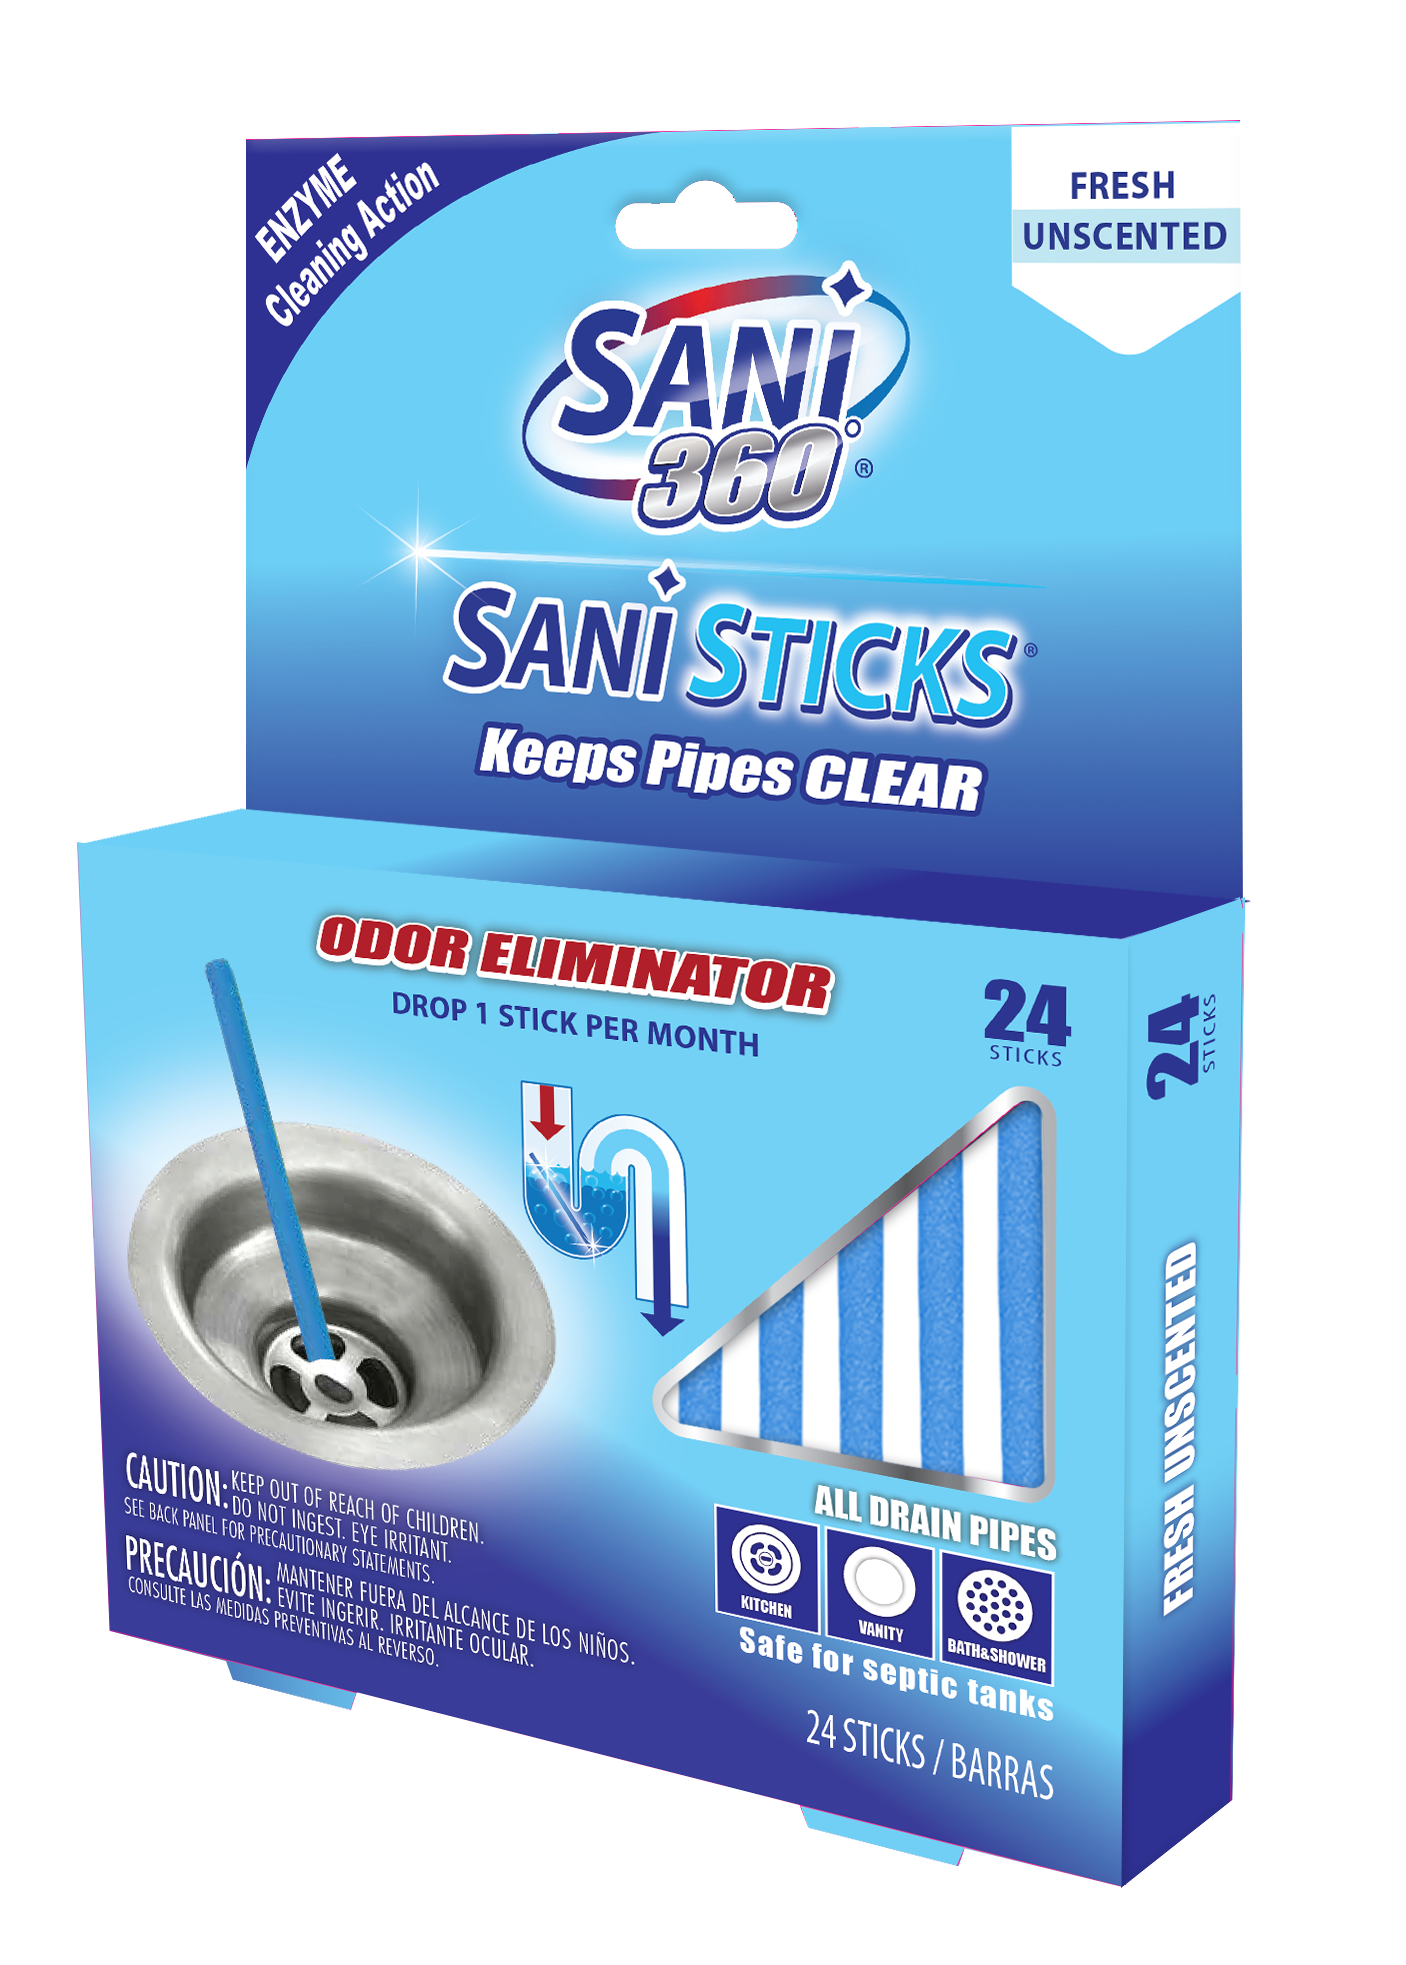 Sani Sticks Sewer Cleaning Rod Drain Cleaner